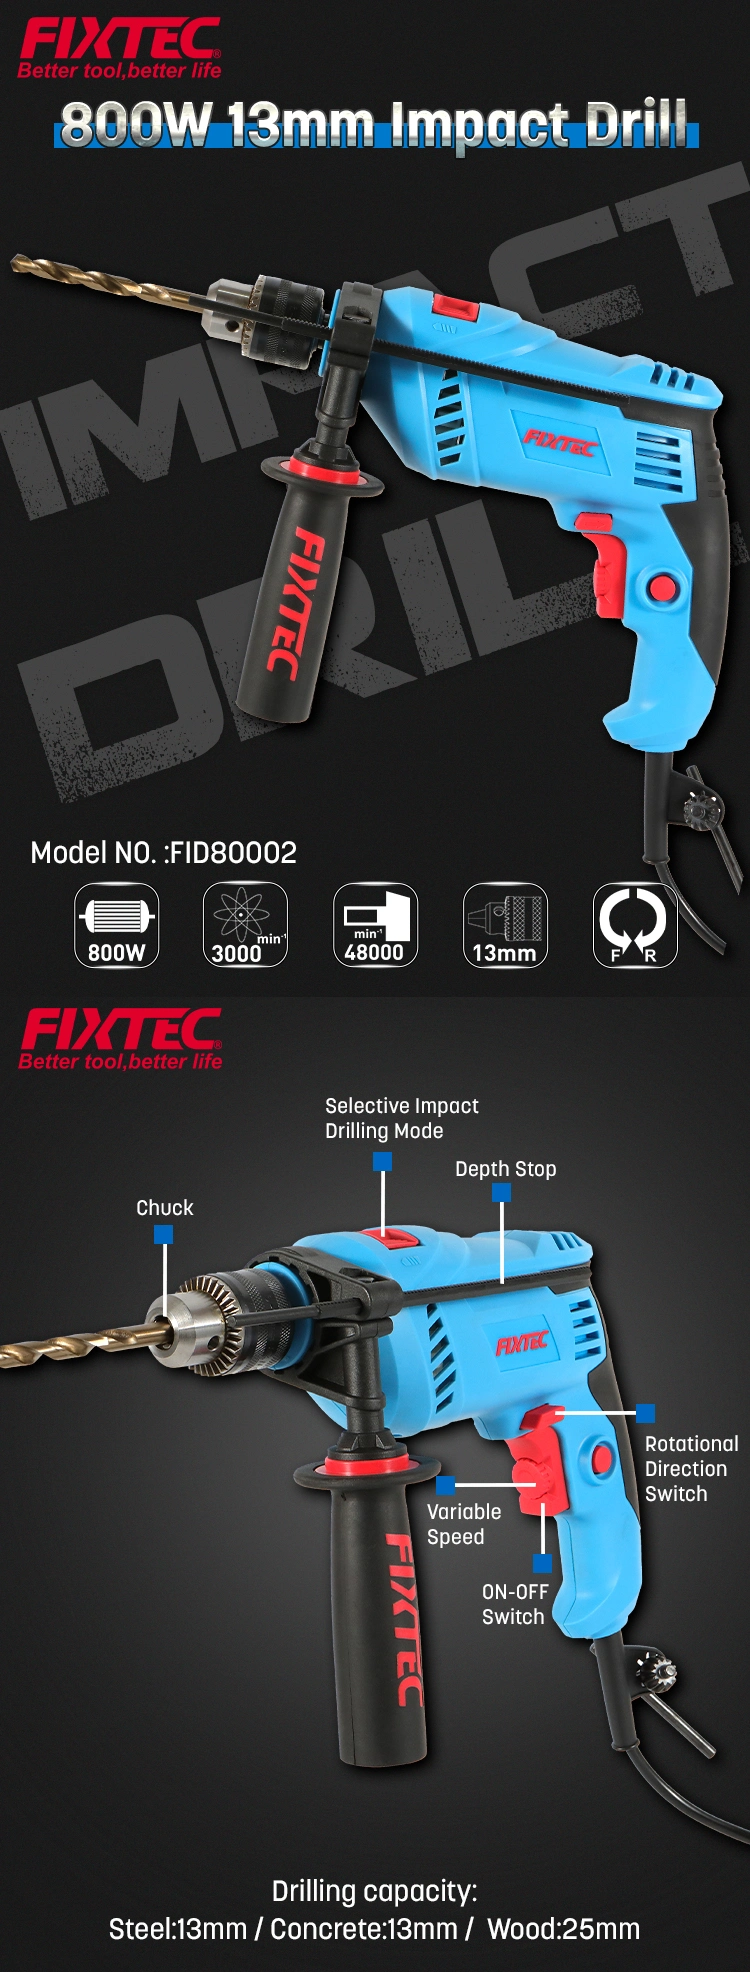 Fixtec Power Tools 800W Impact Driver Kit with 13mm Keyed Chuck Drill